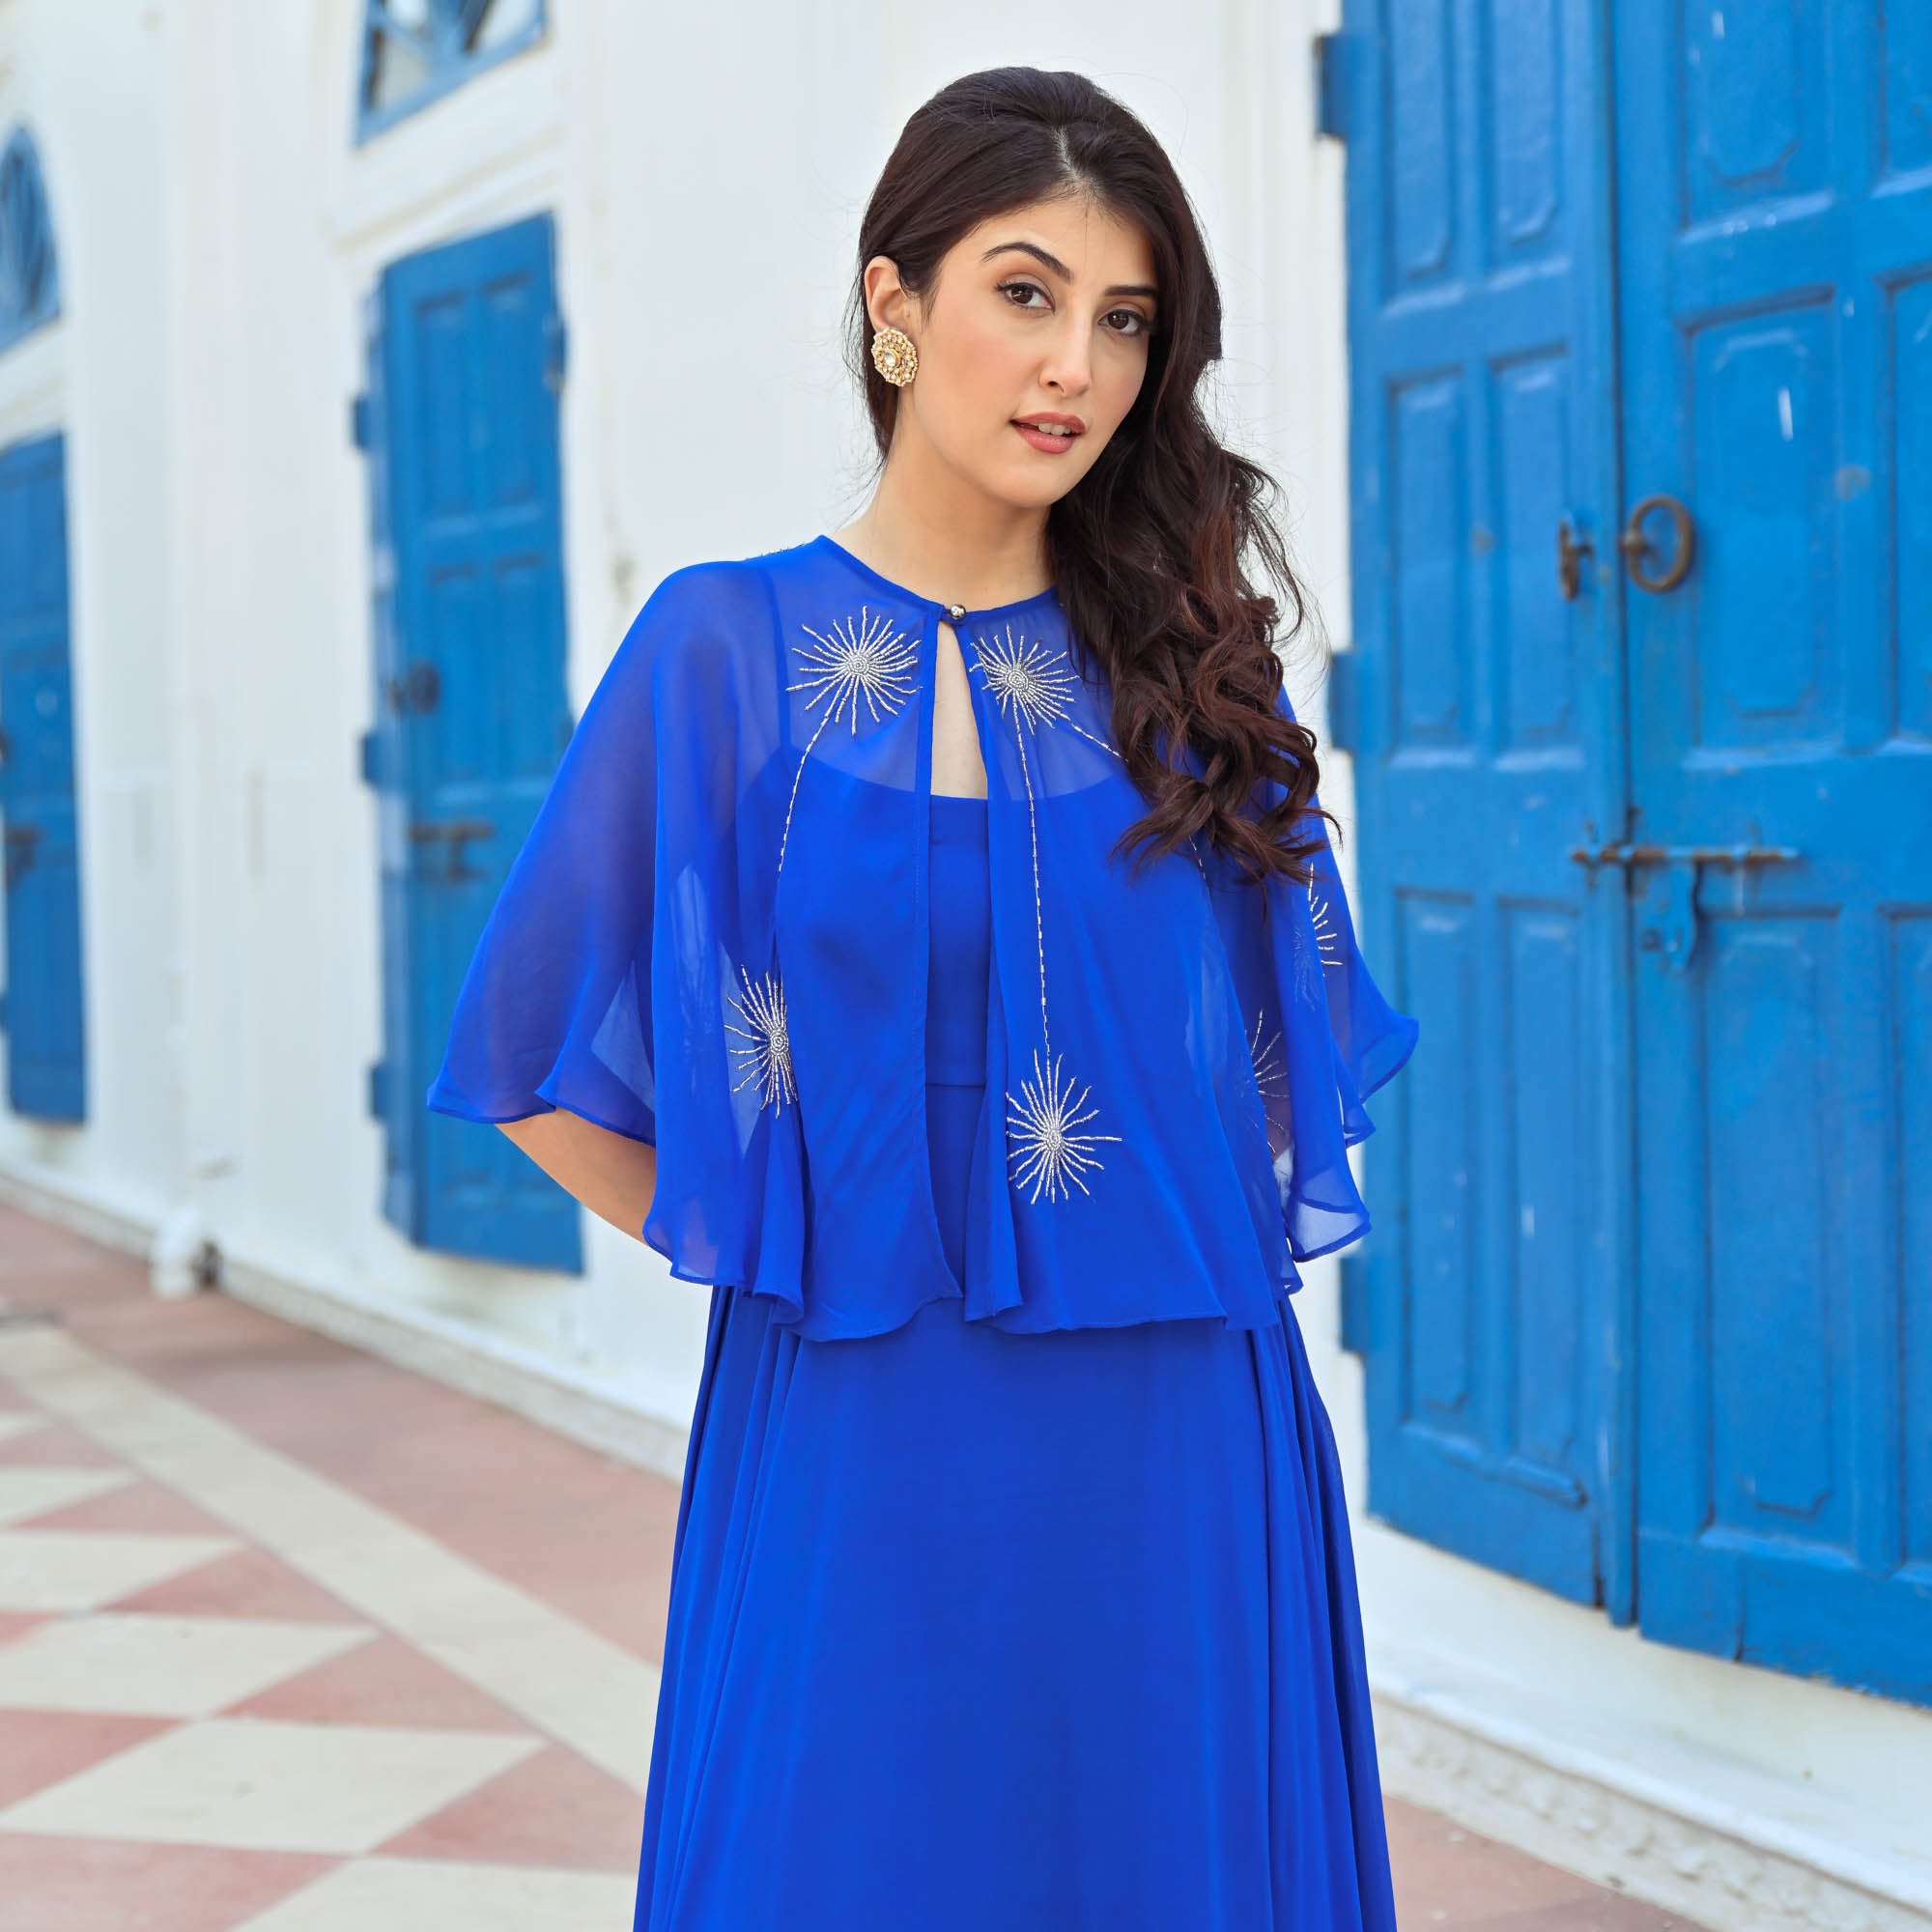 Blue Cut Sleeves Dress with Shrug for Women Online